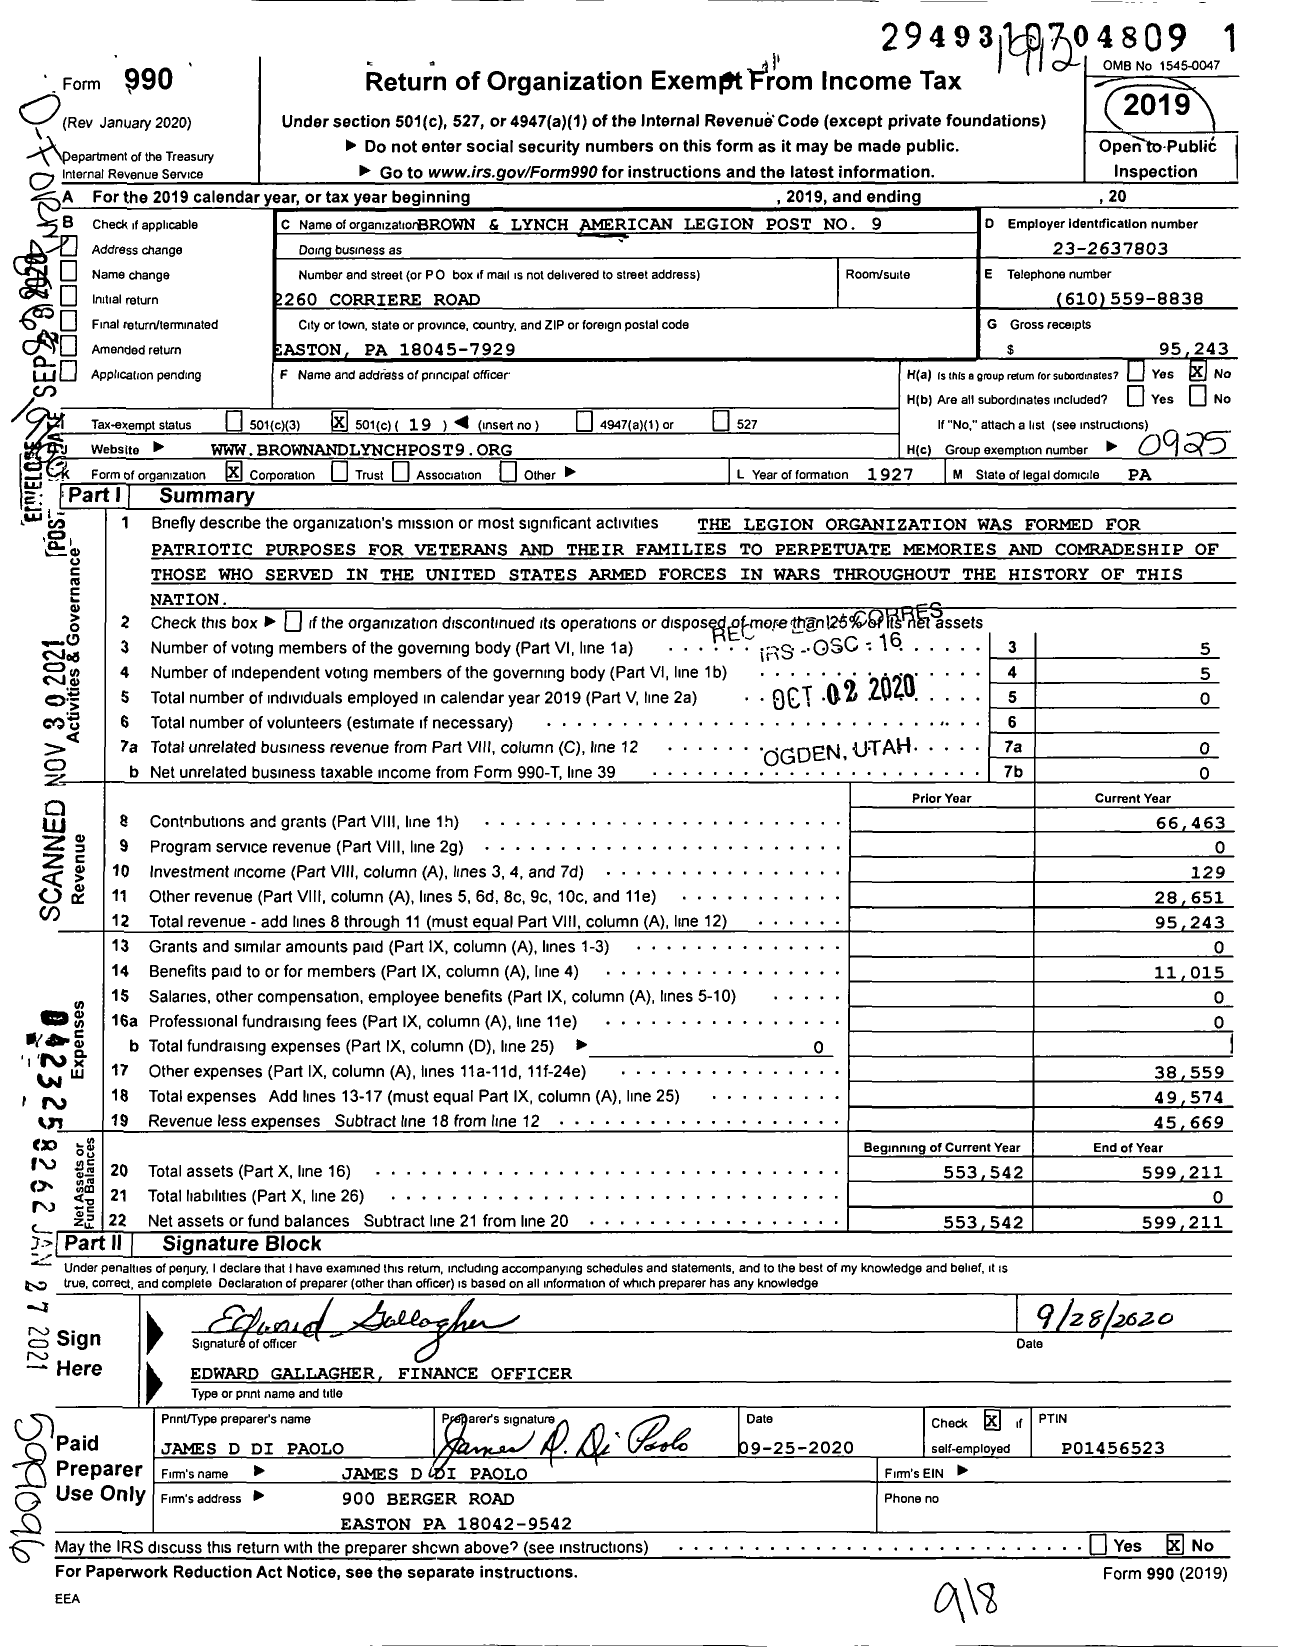 Image of first page of 2019 Form 990O for Brown and Lynch American Legion Post No 9